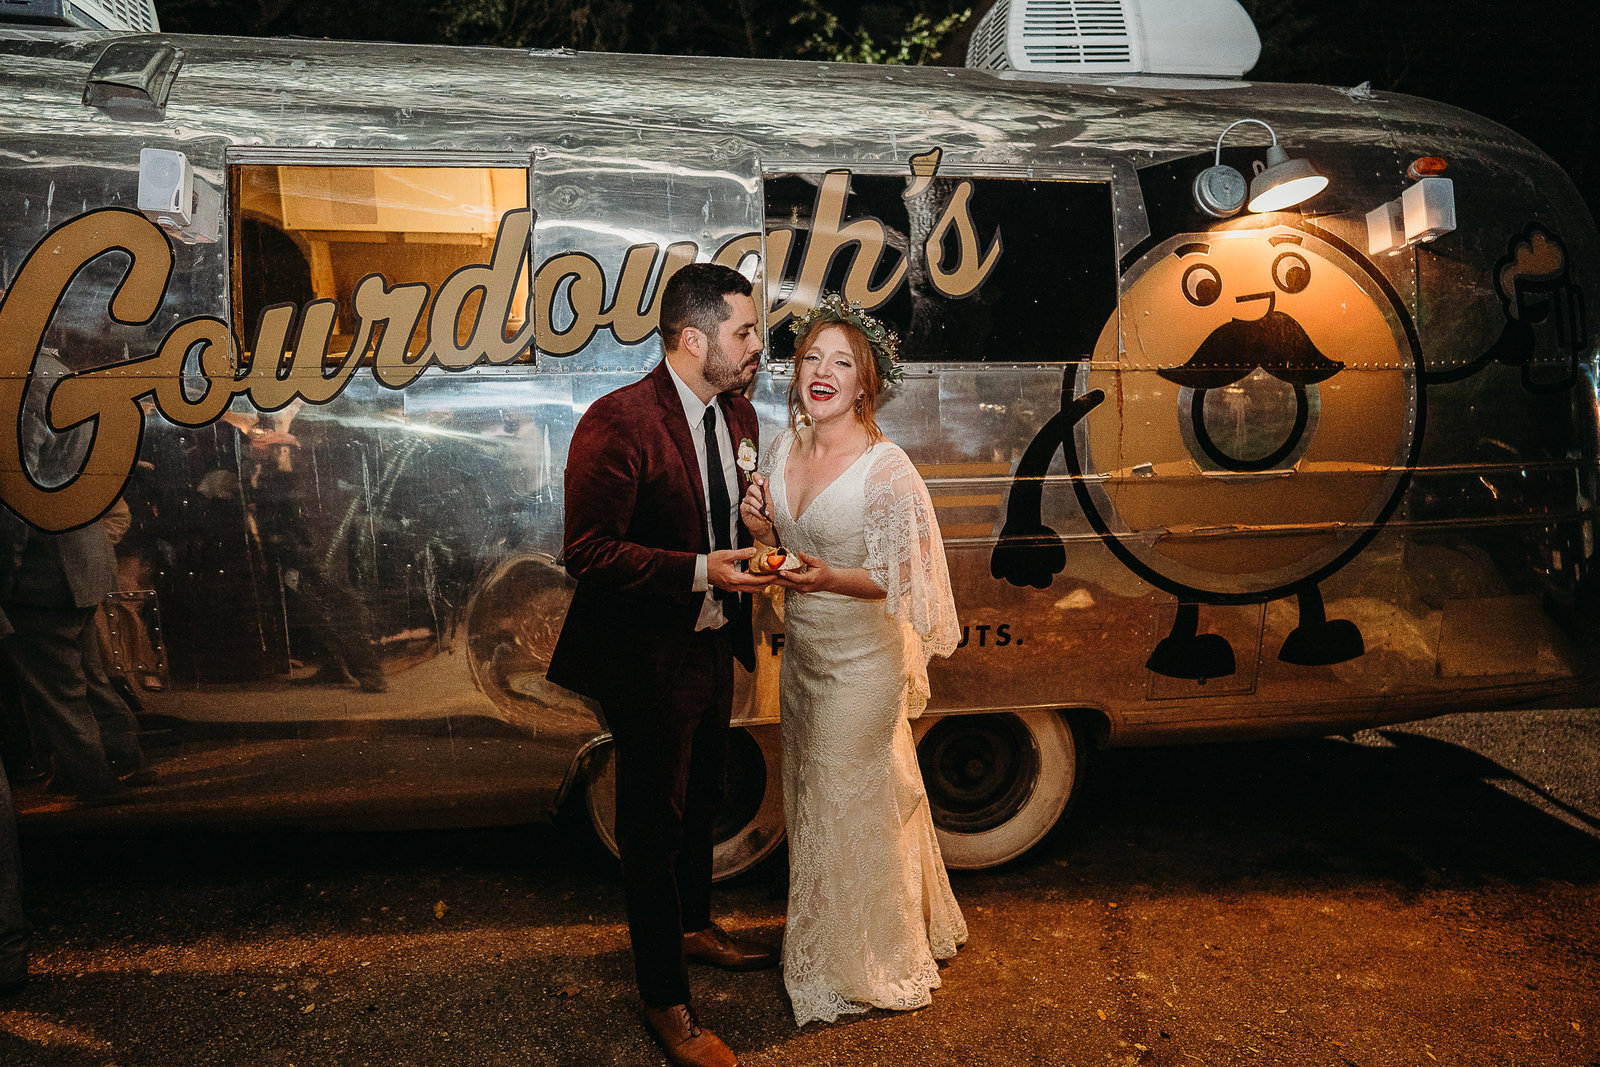 couple shares a donut outside food truck after wedding